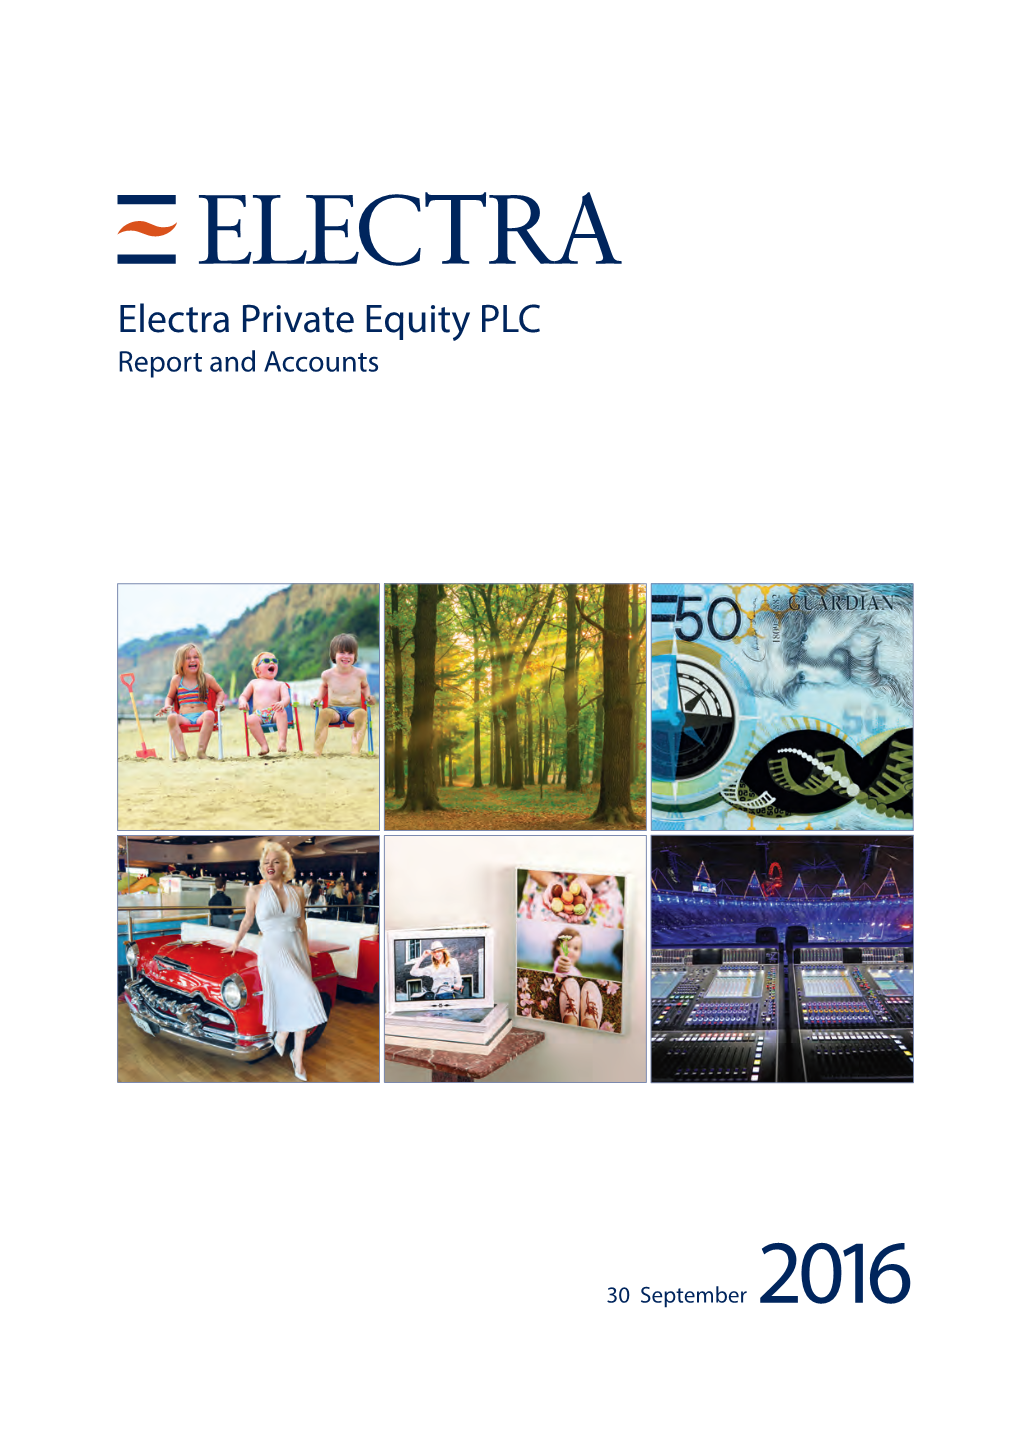 Electra Private Equity PLC 2016 Annual Report